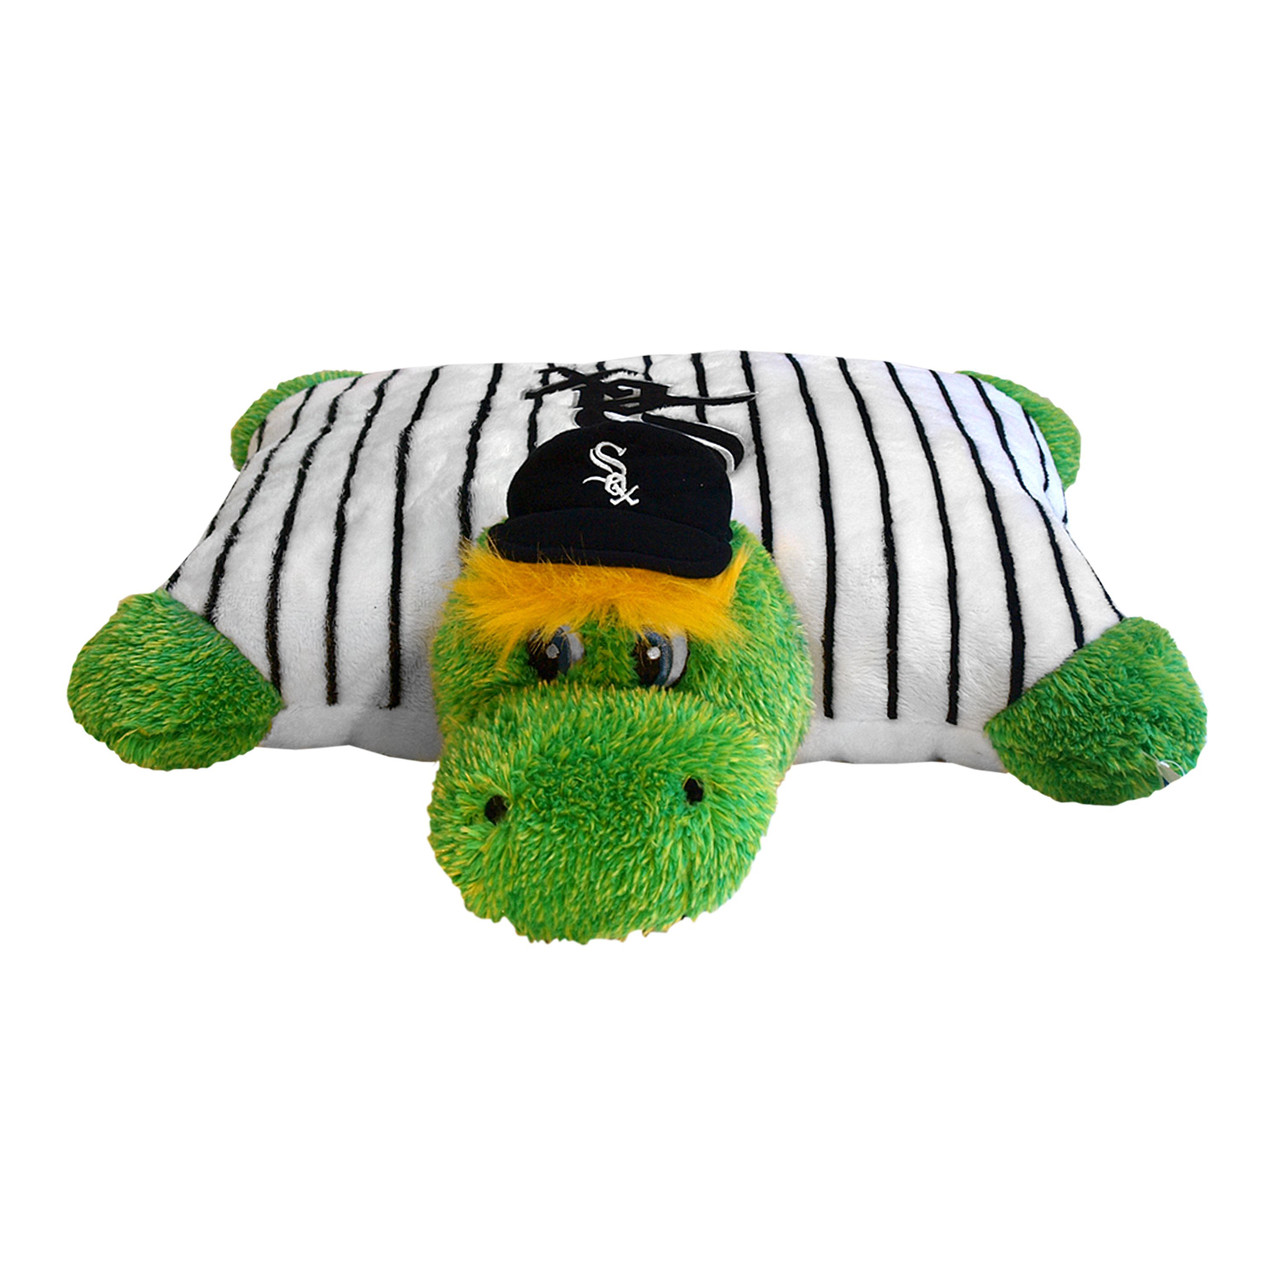 PETS FIRST MLB Dog & Cat Jersey, Chicago White Sox, Large - Chewy